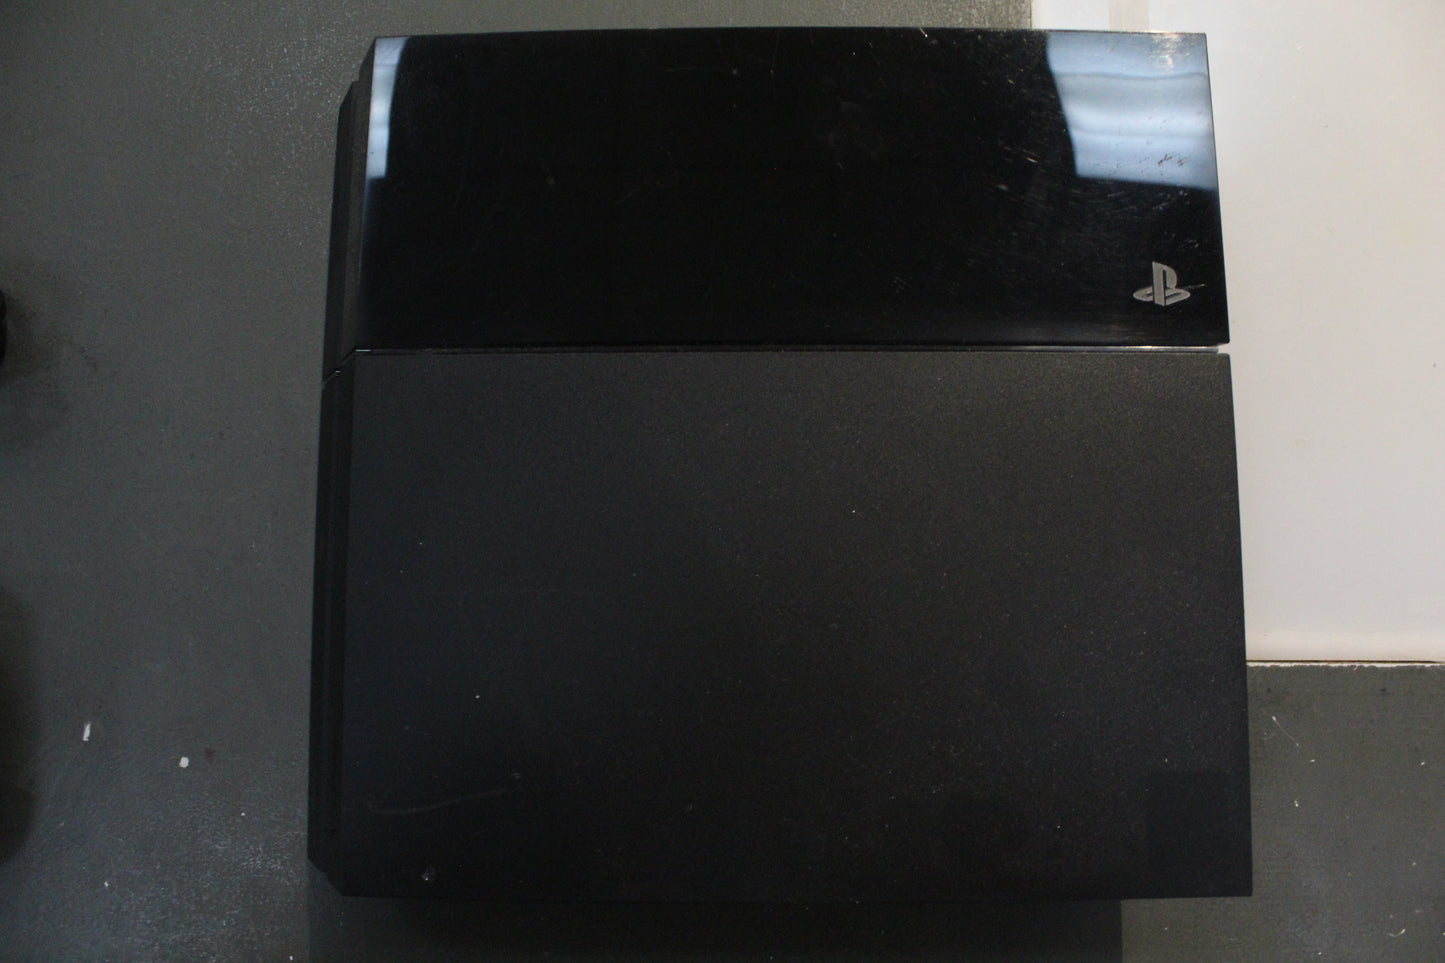 PlayStation 4 With power cable and controller (black)